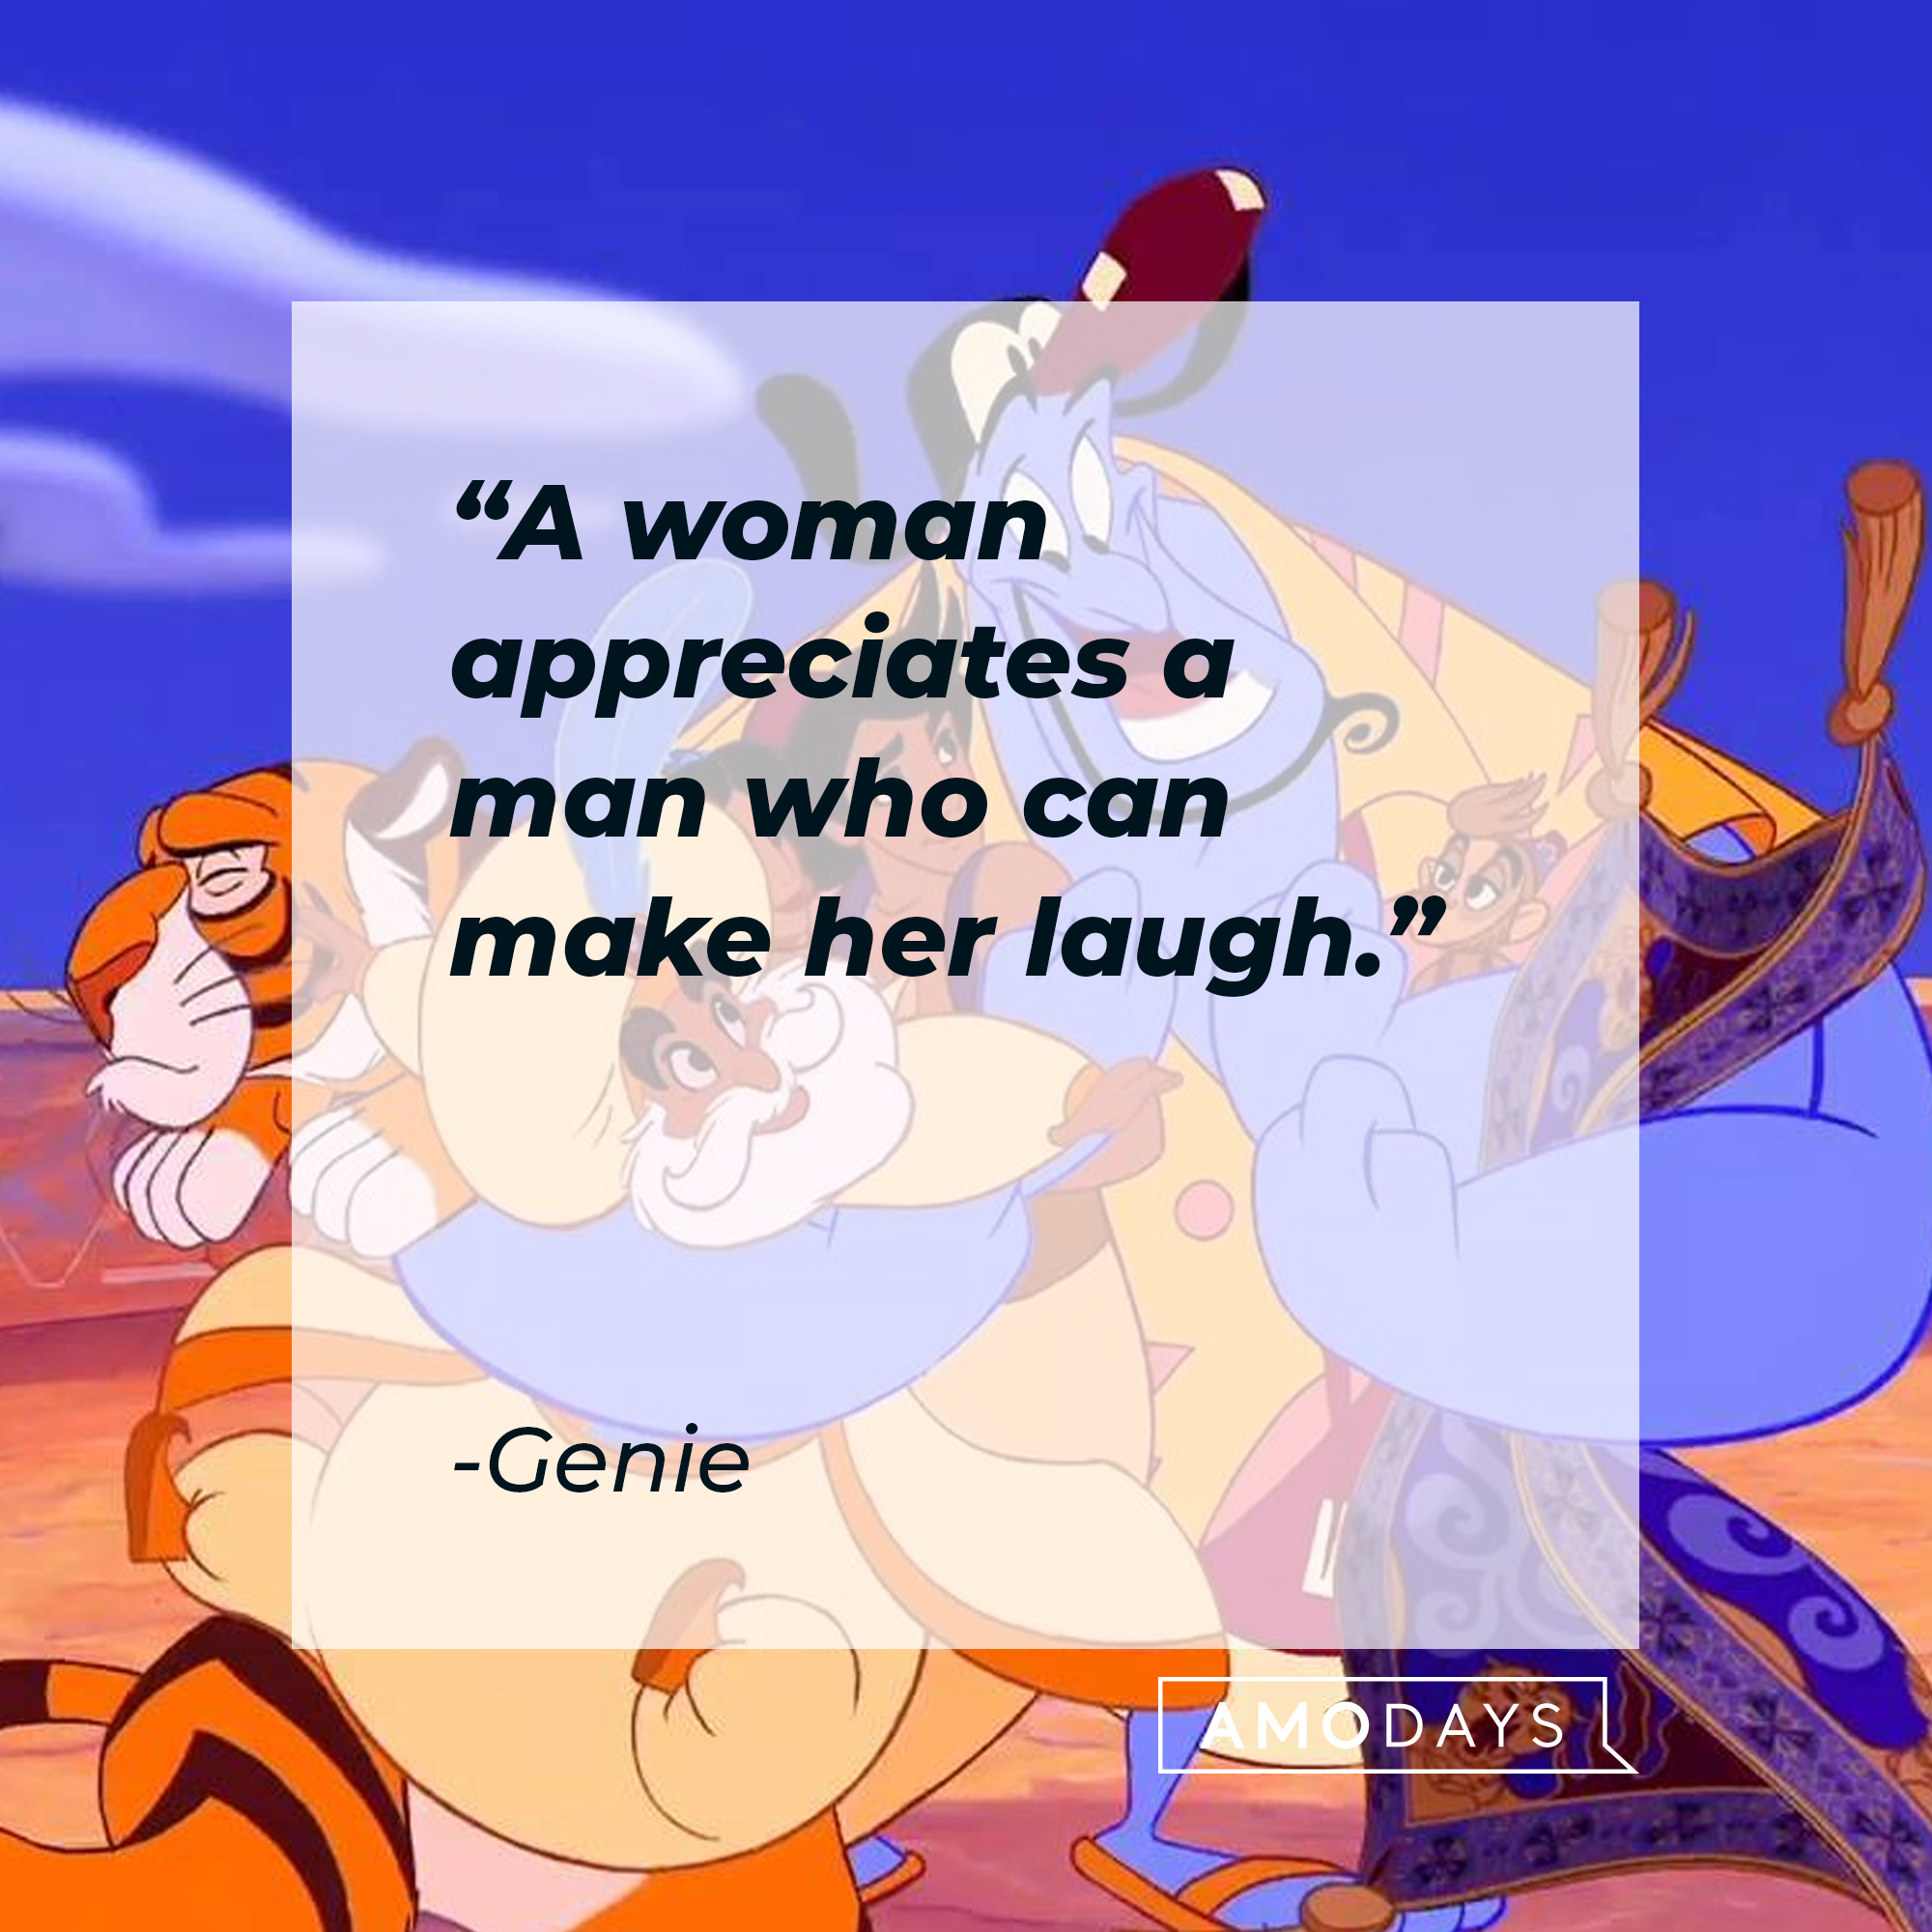 The animated Genie with his quote: "A woman appreciates a man who can make her laugh." | Source: Facebook.com/DisneyAladdin